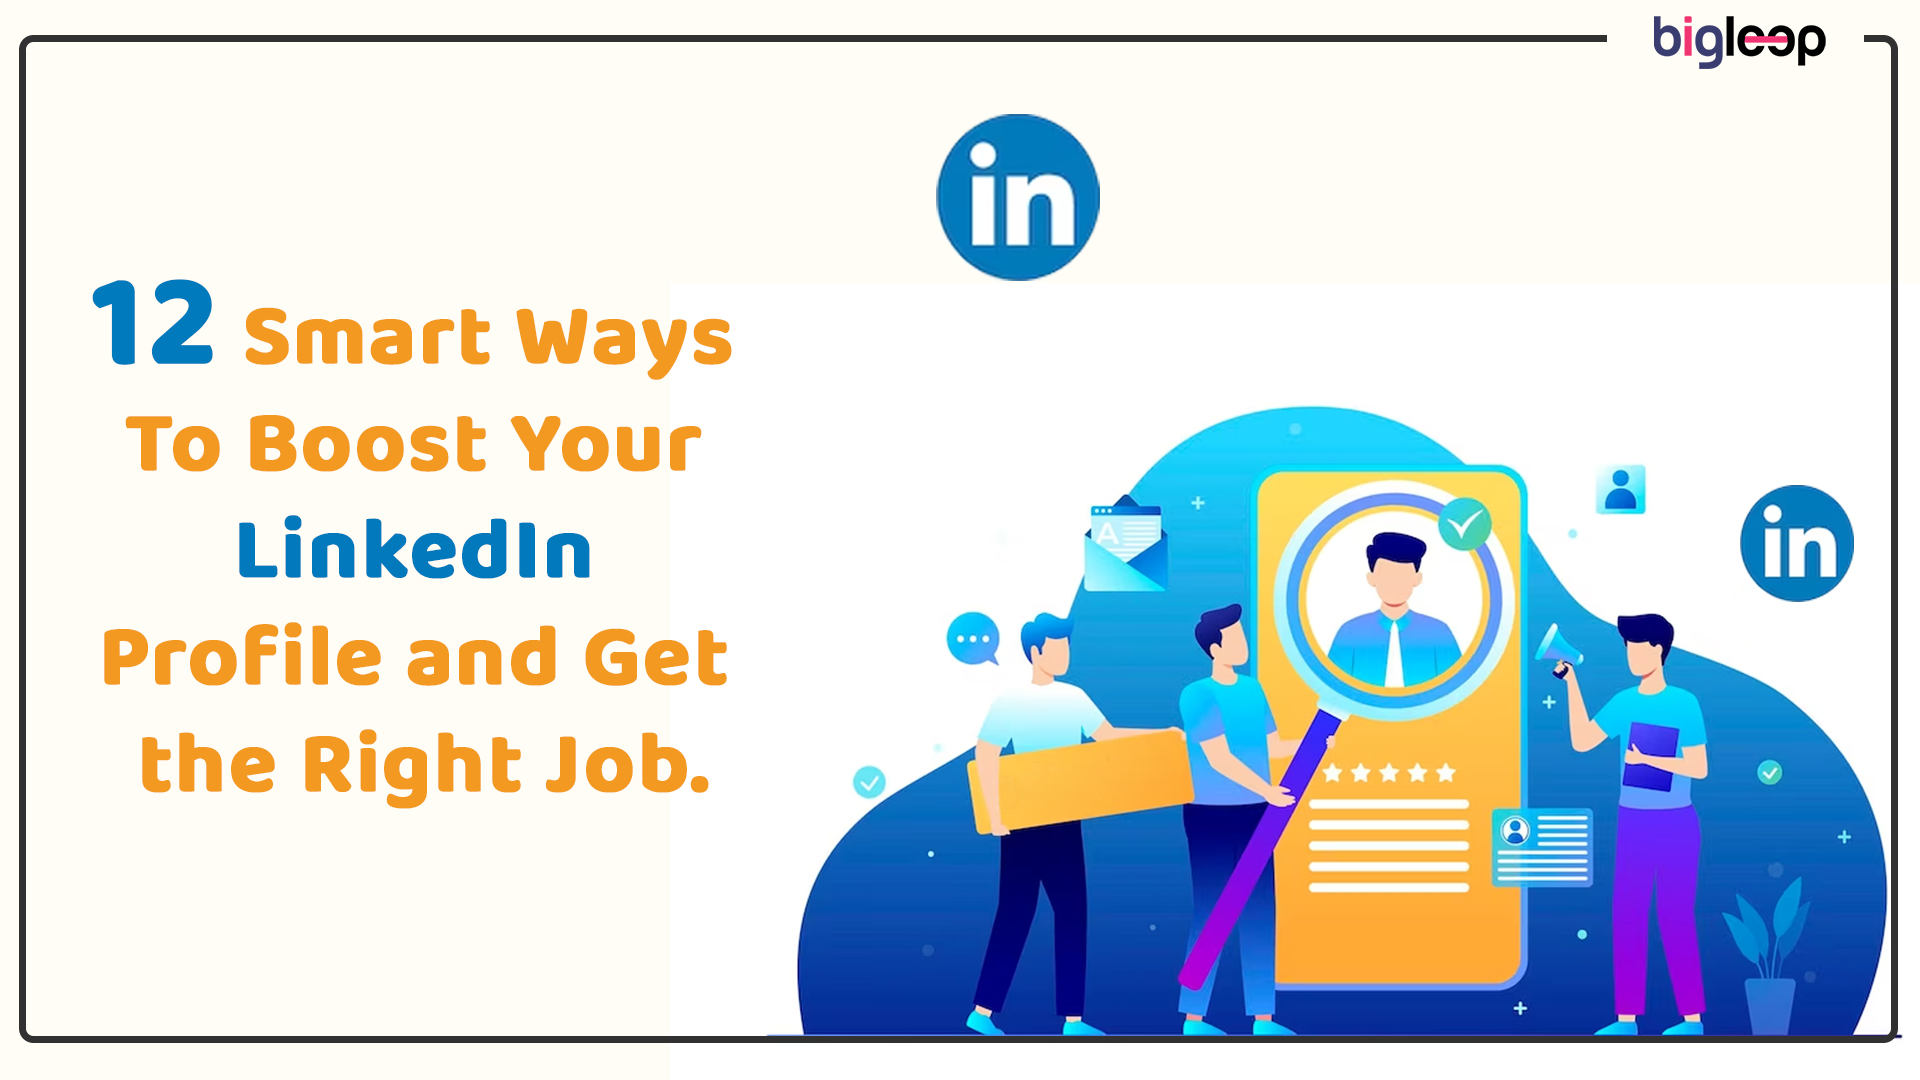 12 Smart Ways To Boost Your Linkedin Profile and Get the Right Job